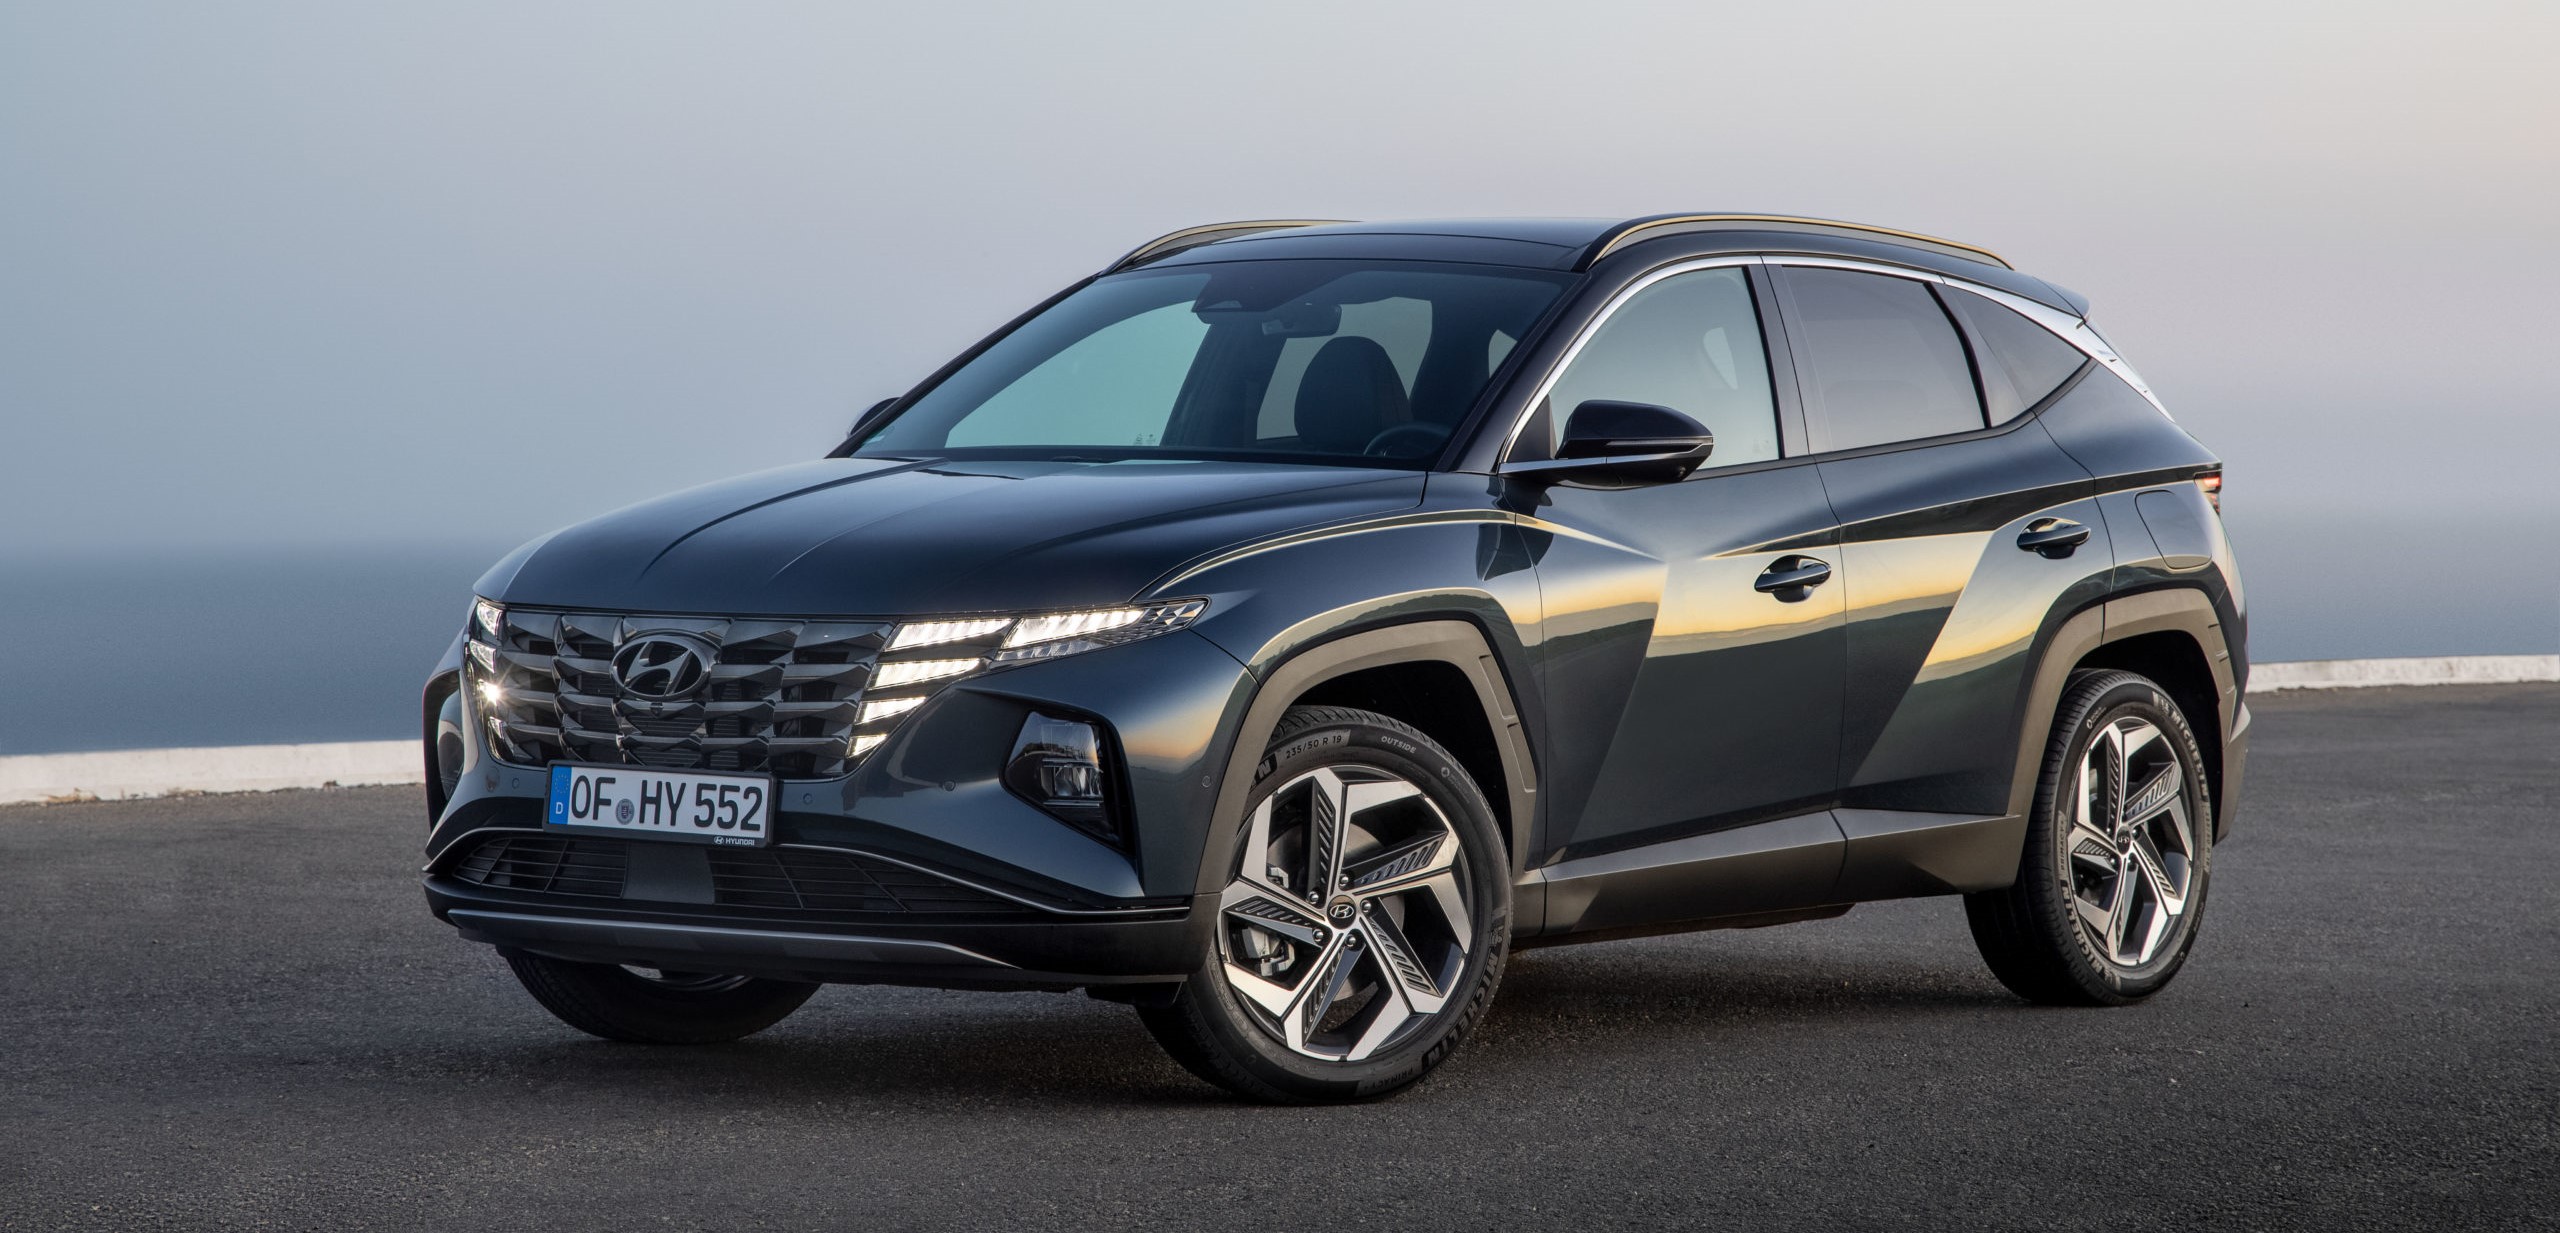 2023 SUVs: The Best SUVs to Buy for Your Needs